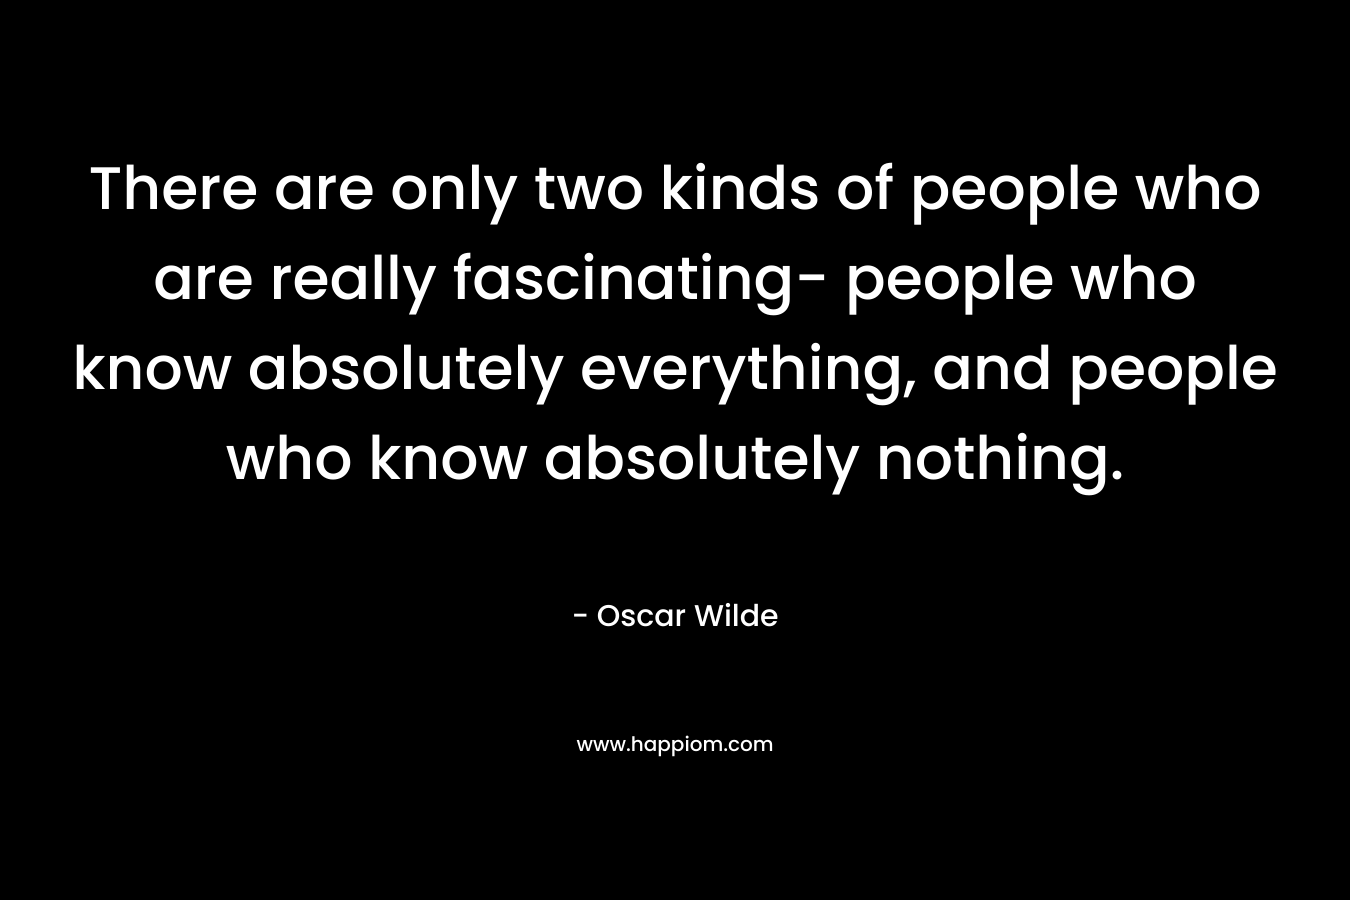 There are only two kinds of people who are really fascinating- people who know absolutely everything, and people who know absolutely nothing.